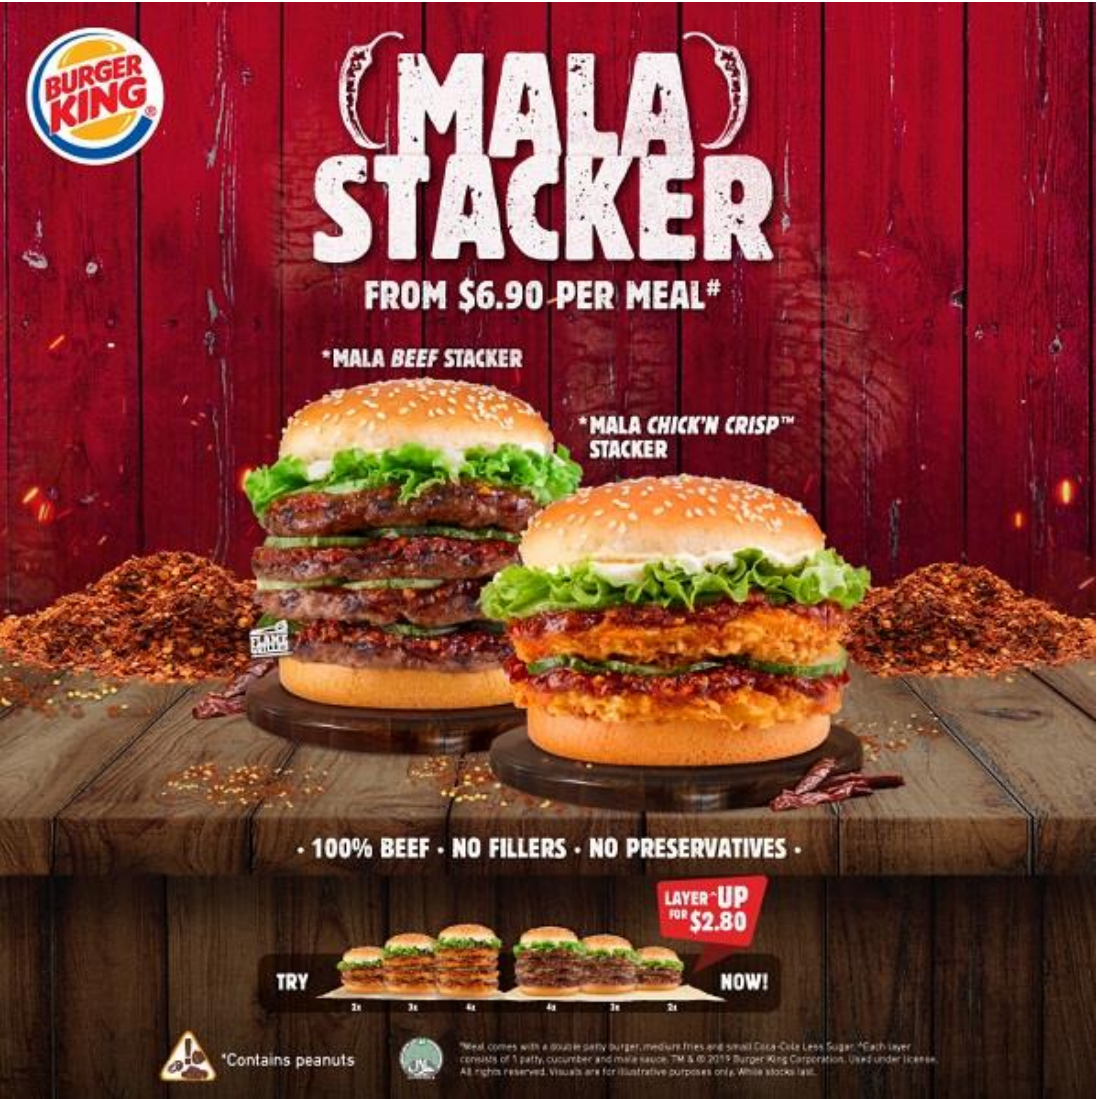 Hot and high stakes with the Mala Stacker Burgers at BURGER KING®